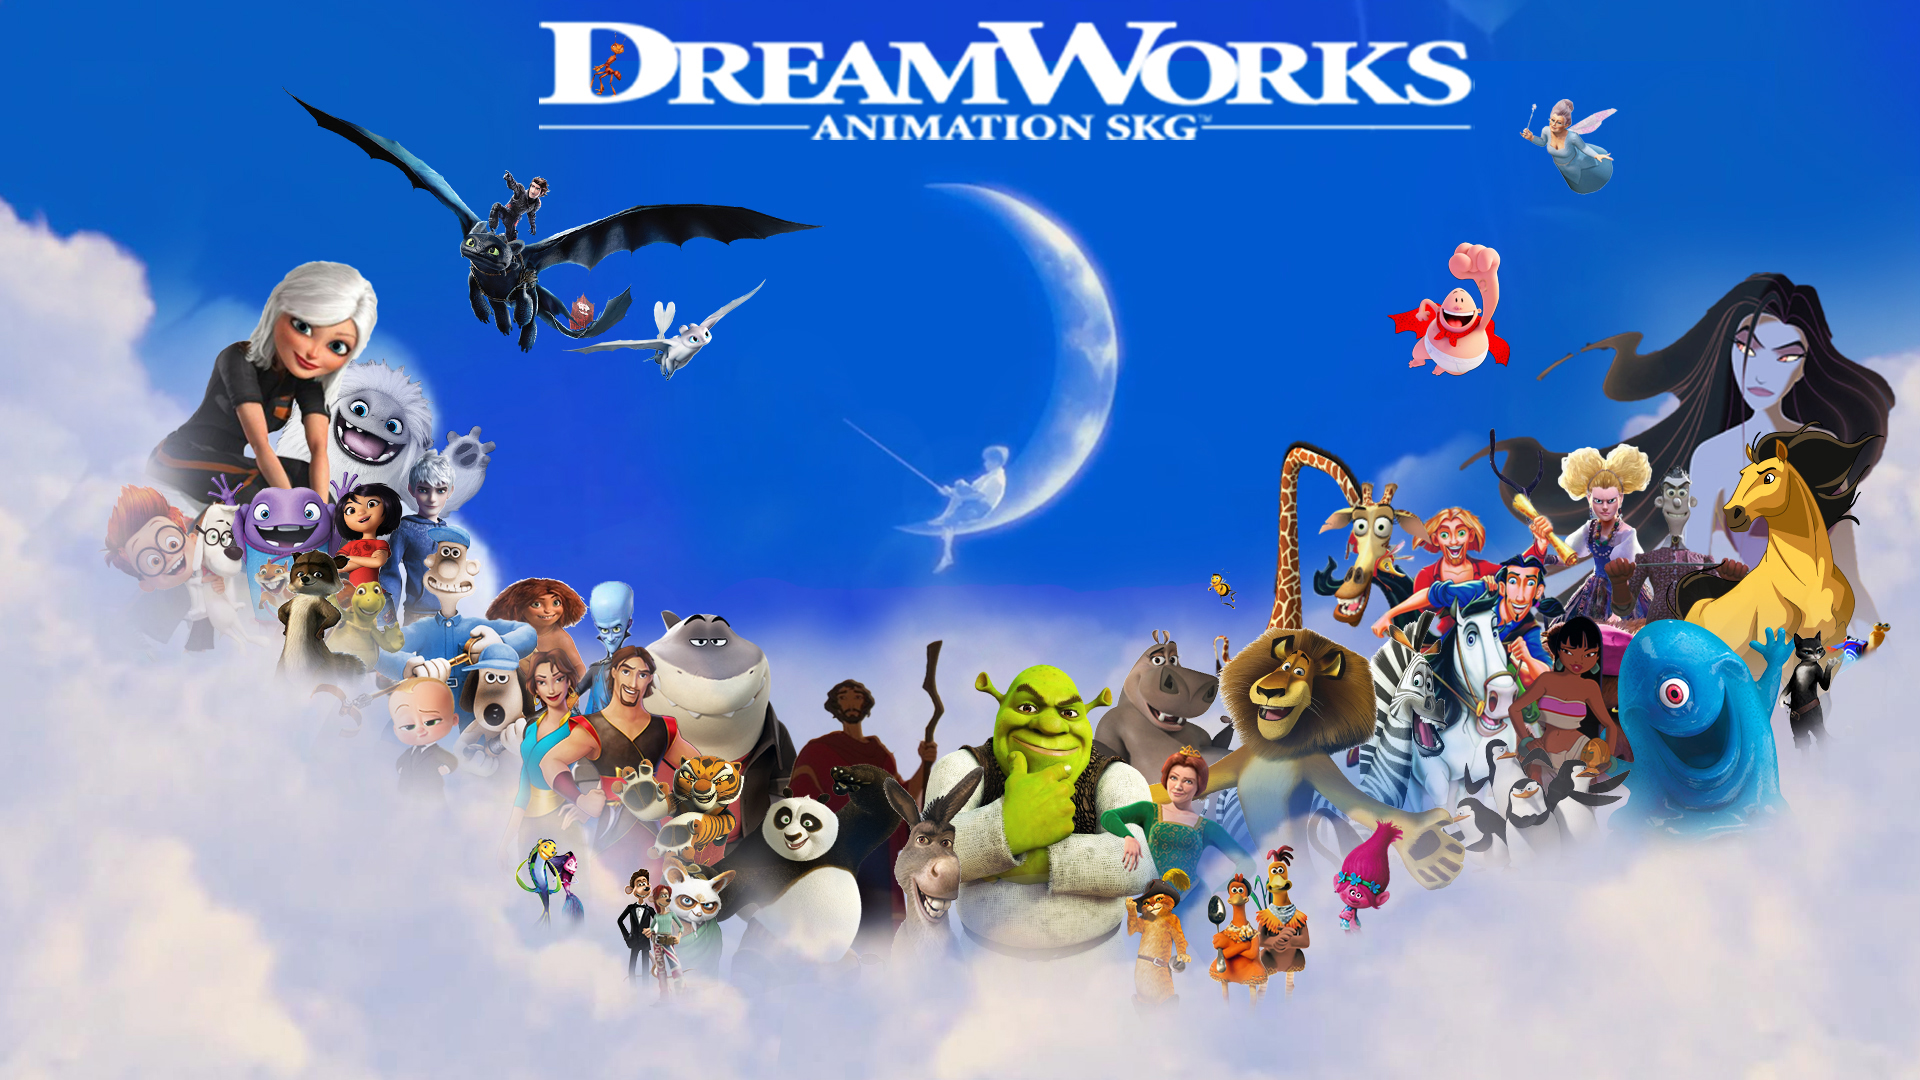 DreamWorks Animation famous cartoon characters